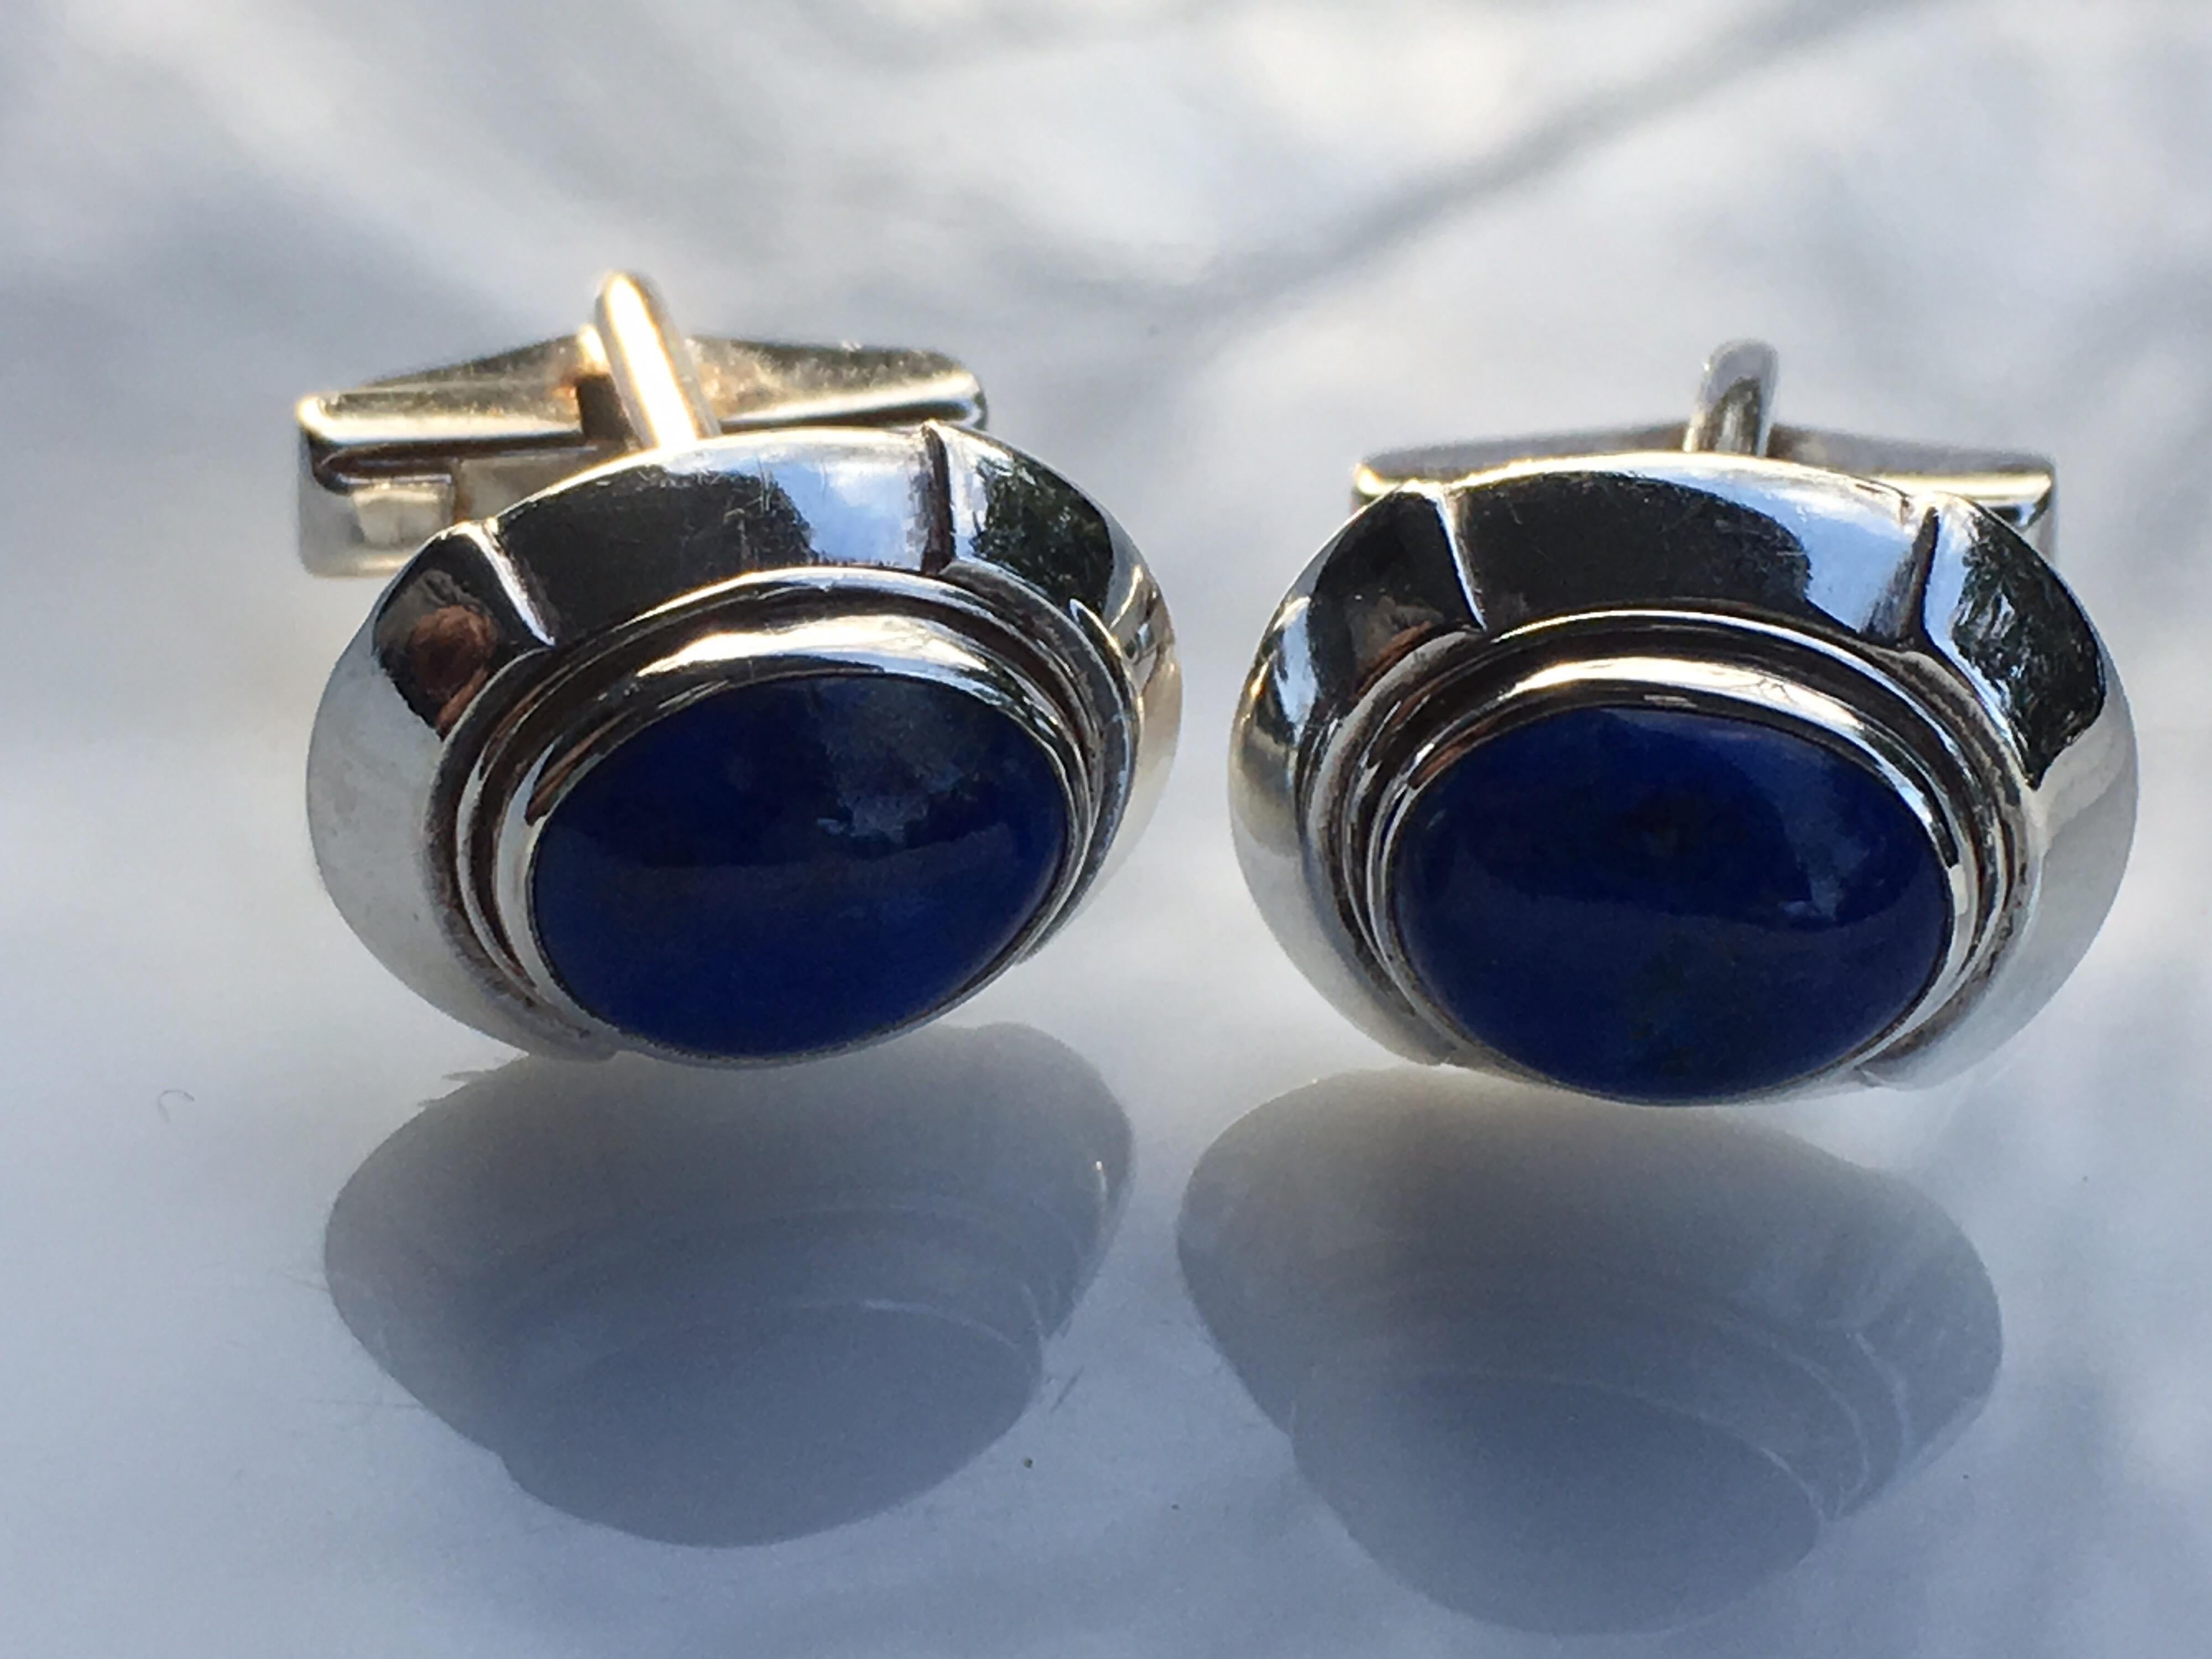 Natural undyed untreated oval 6 MM x 8 MM approx 3 carat Lapis set in sterling silver is hand crafted one of a kind. Total Cufflinks is 7.10 Gram .